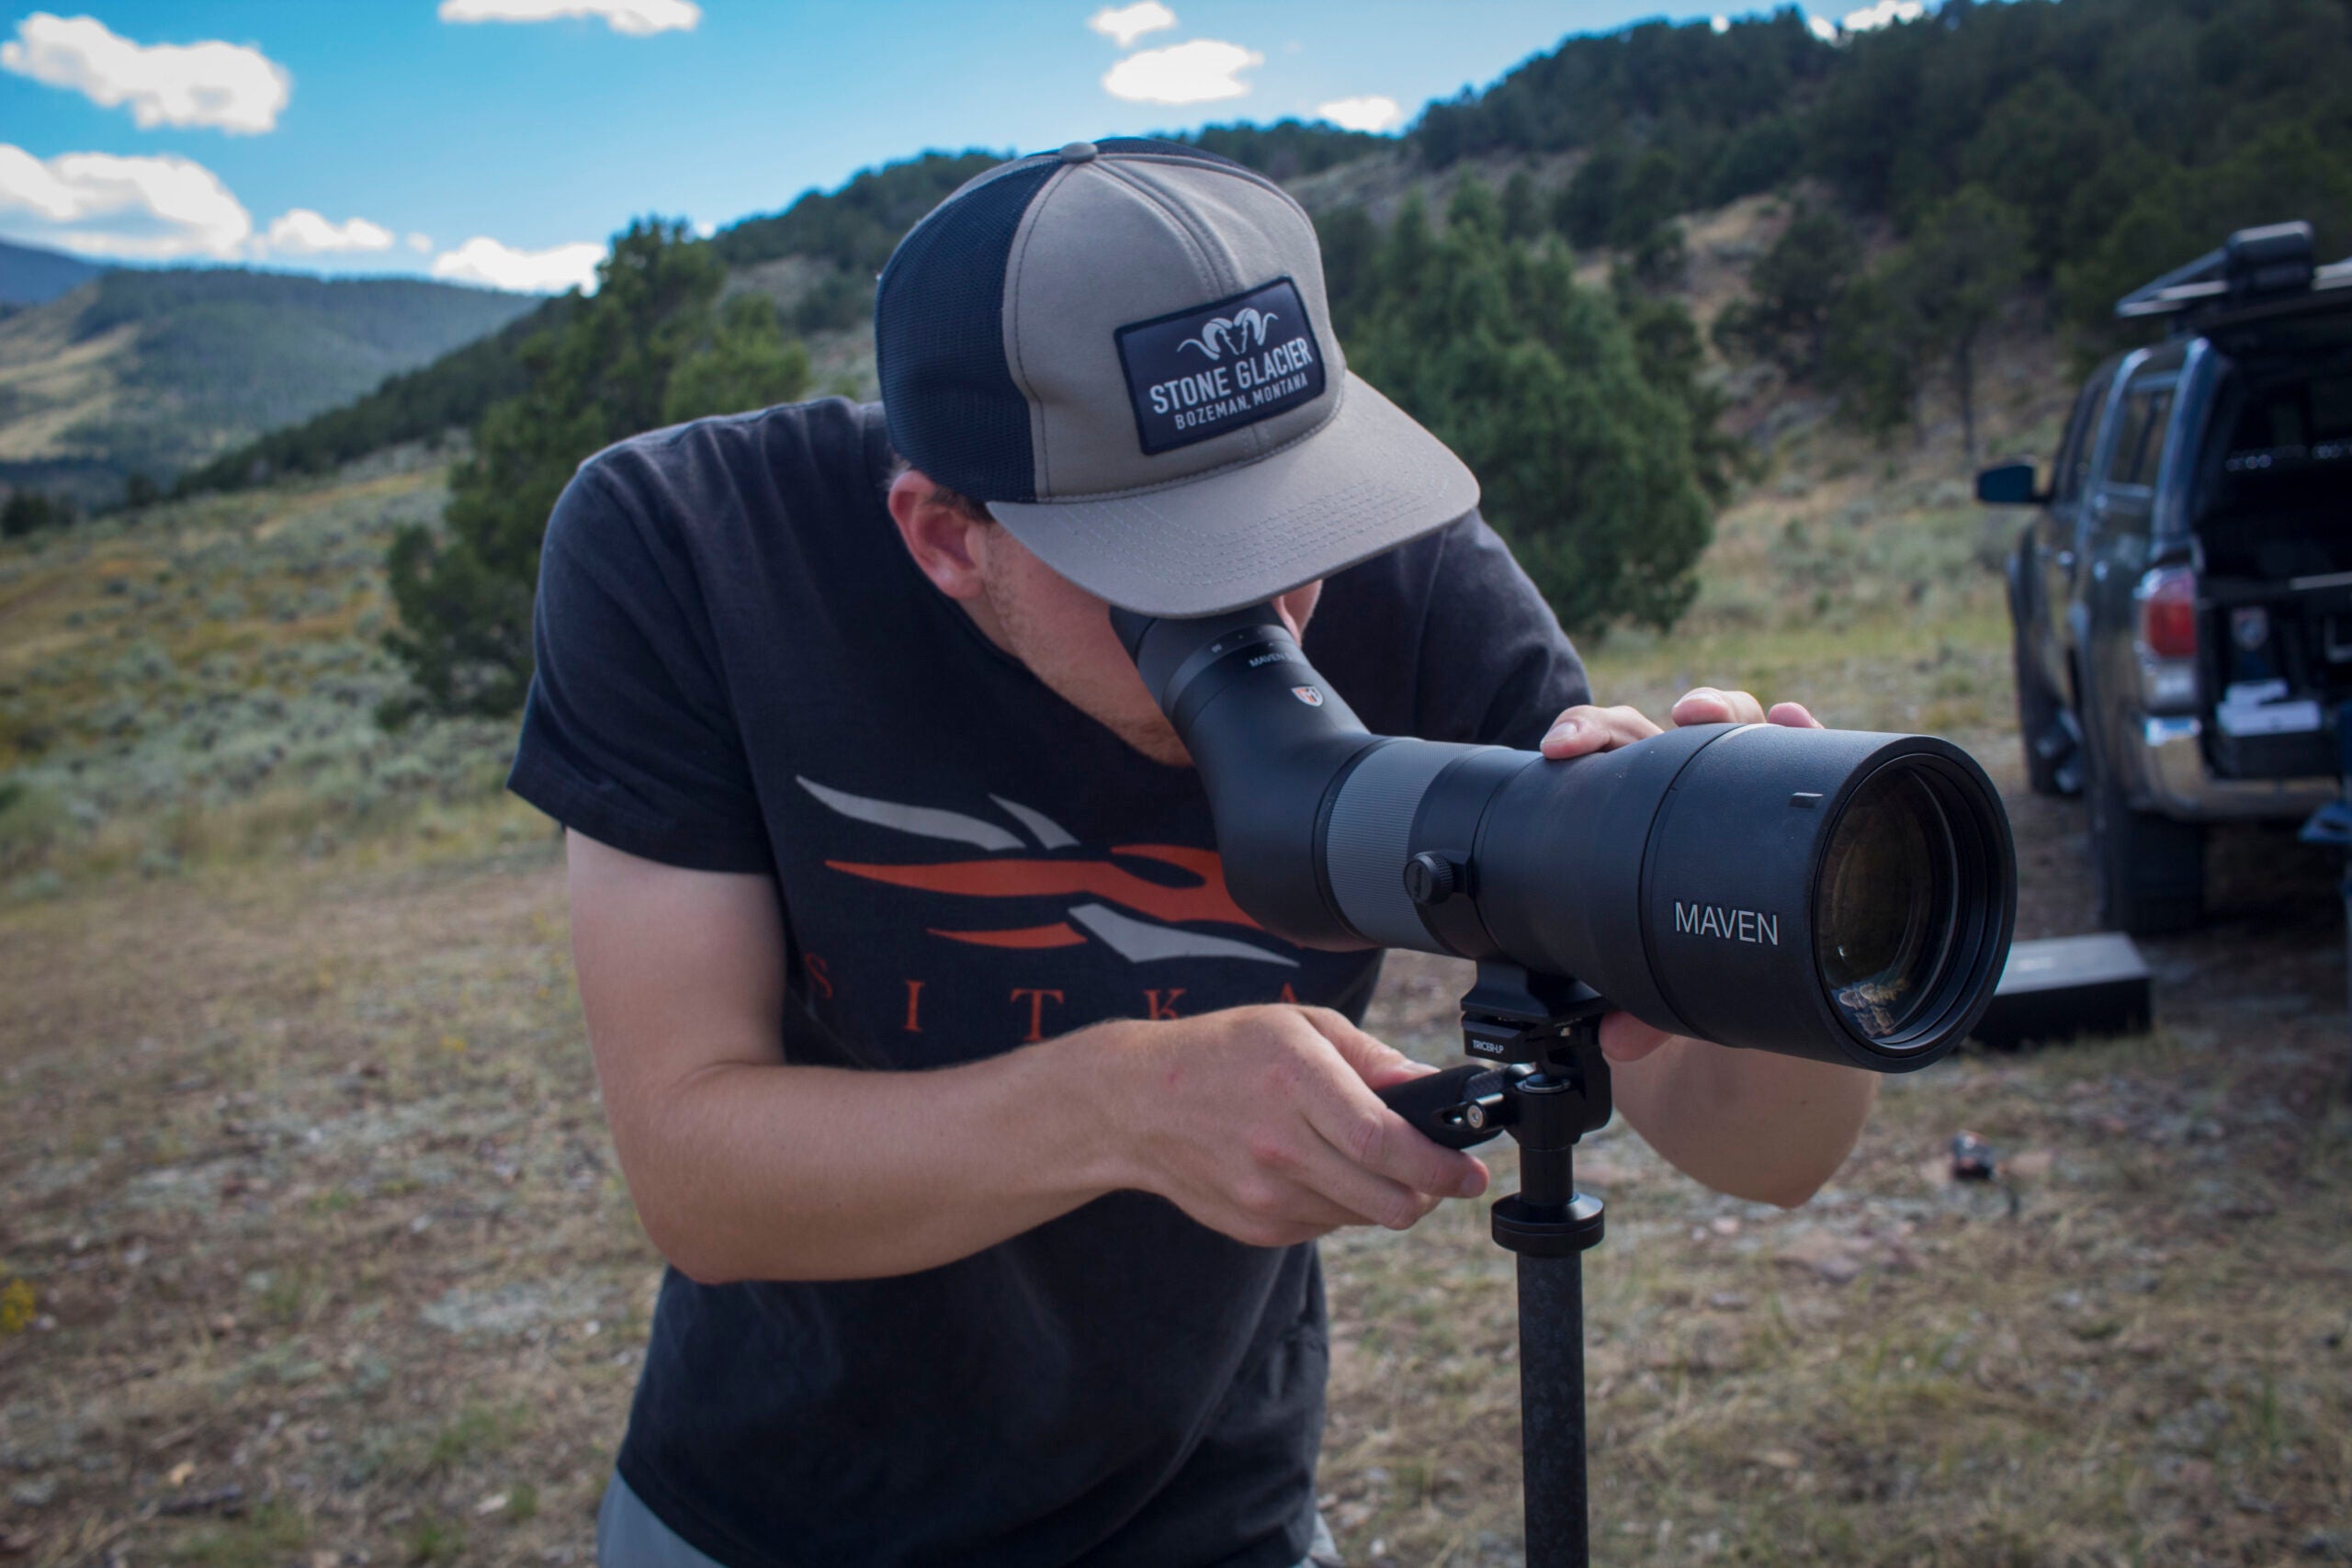 man looks through spotting scope with truck in the background